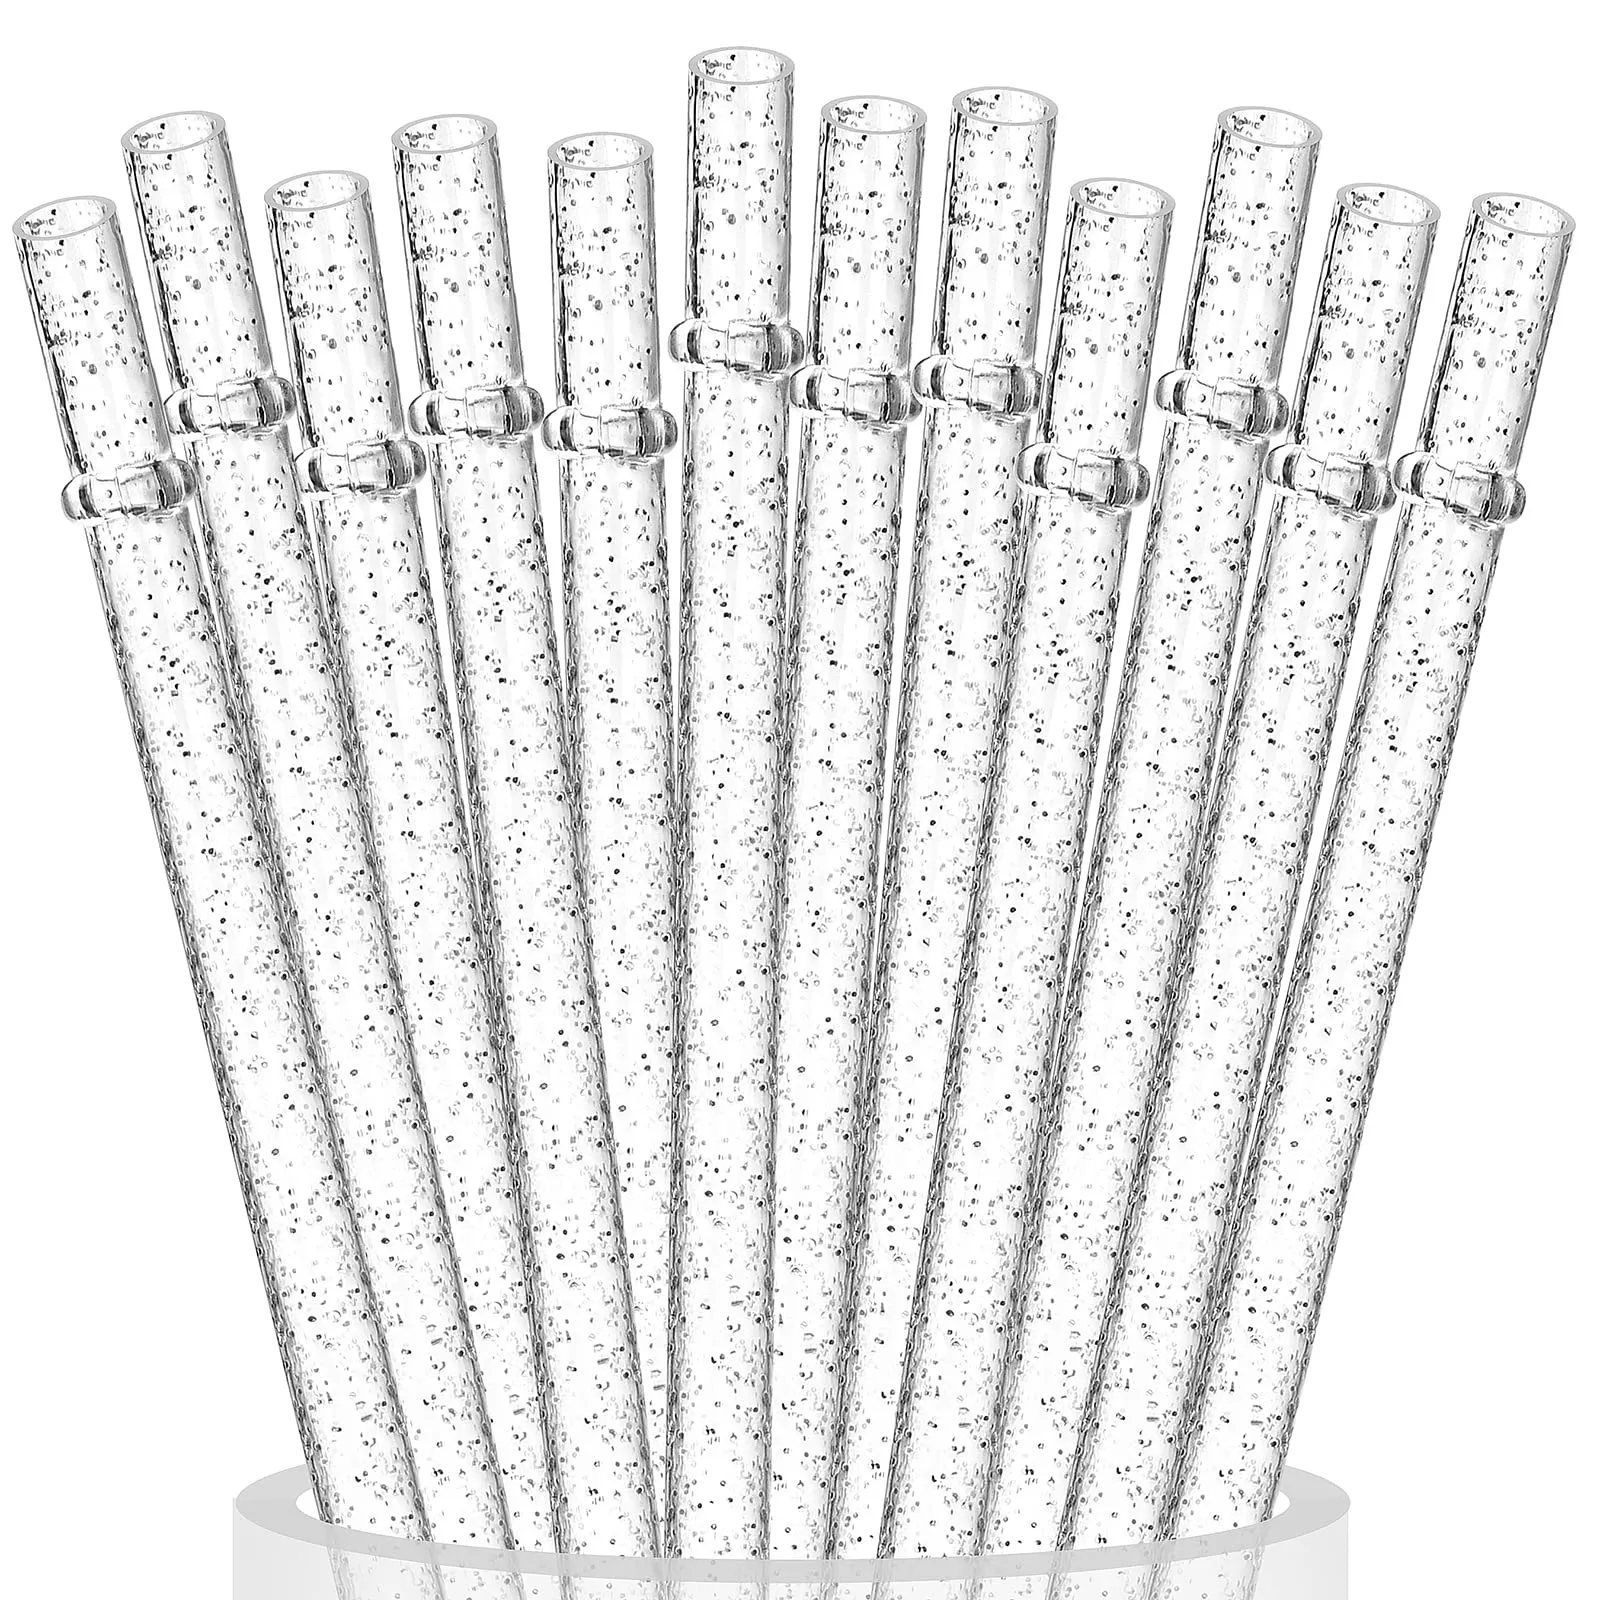 Drinking Straws Reusable Clear Plastic Glitter 11 Long Hard Tumbler Replacement For 20 Oz 30 / Rtic Mason Jars With Cleaning Brush amxuo